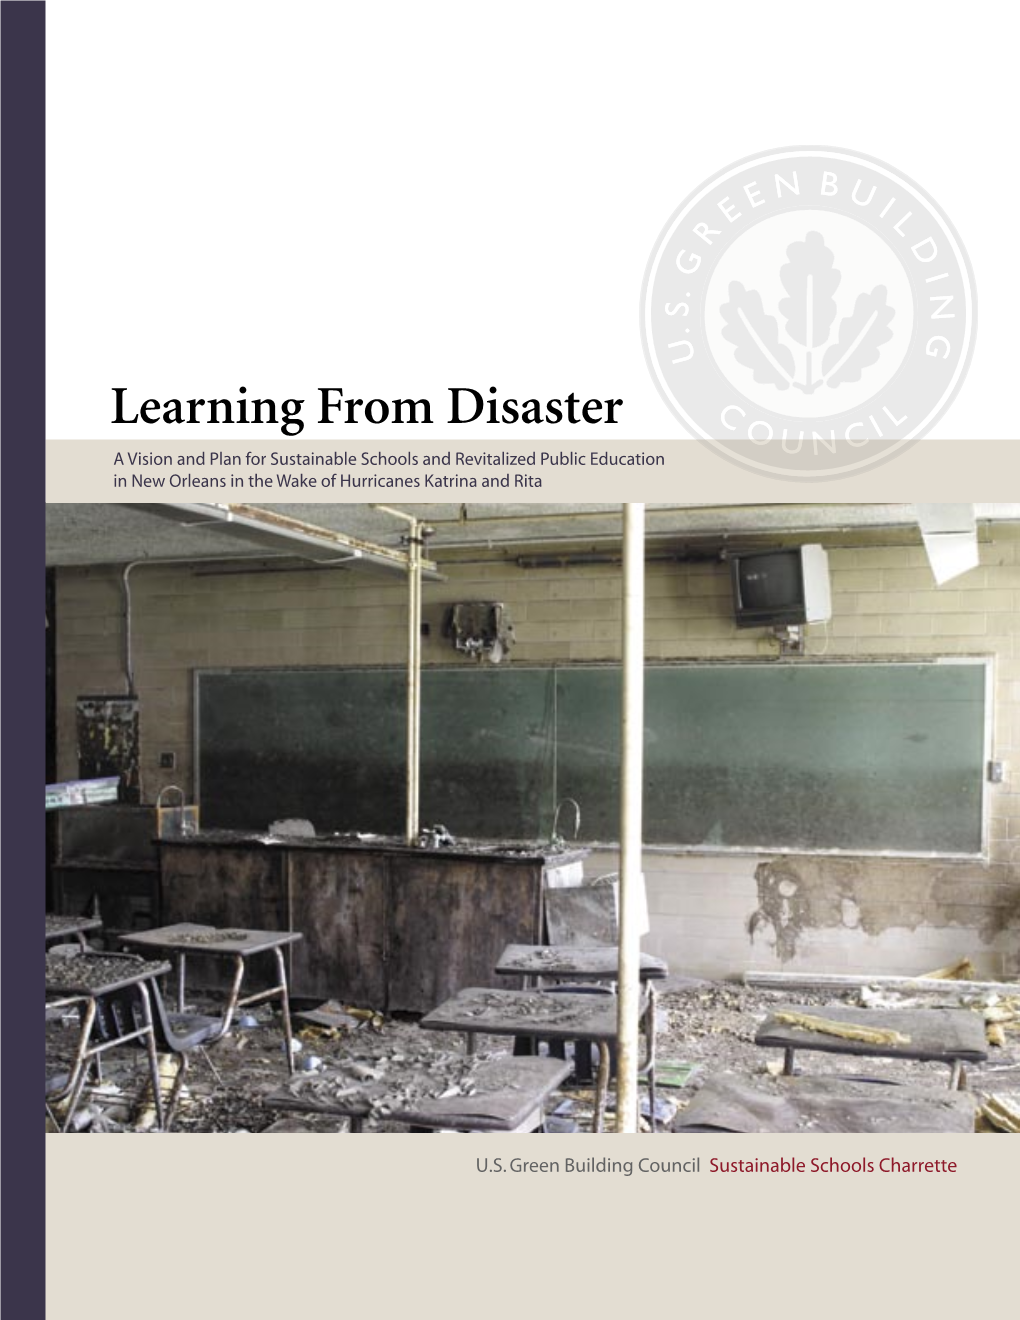 Learning from Disaster a Vision and Plan for Sustainable Schools and Revitalized Public Education in New Orleans in the Wake of Hurricanes Katrina and Rita